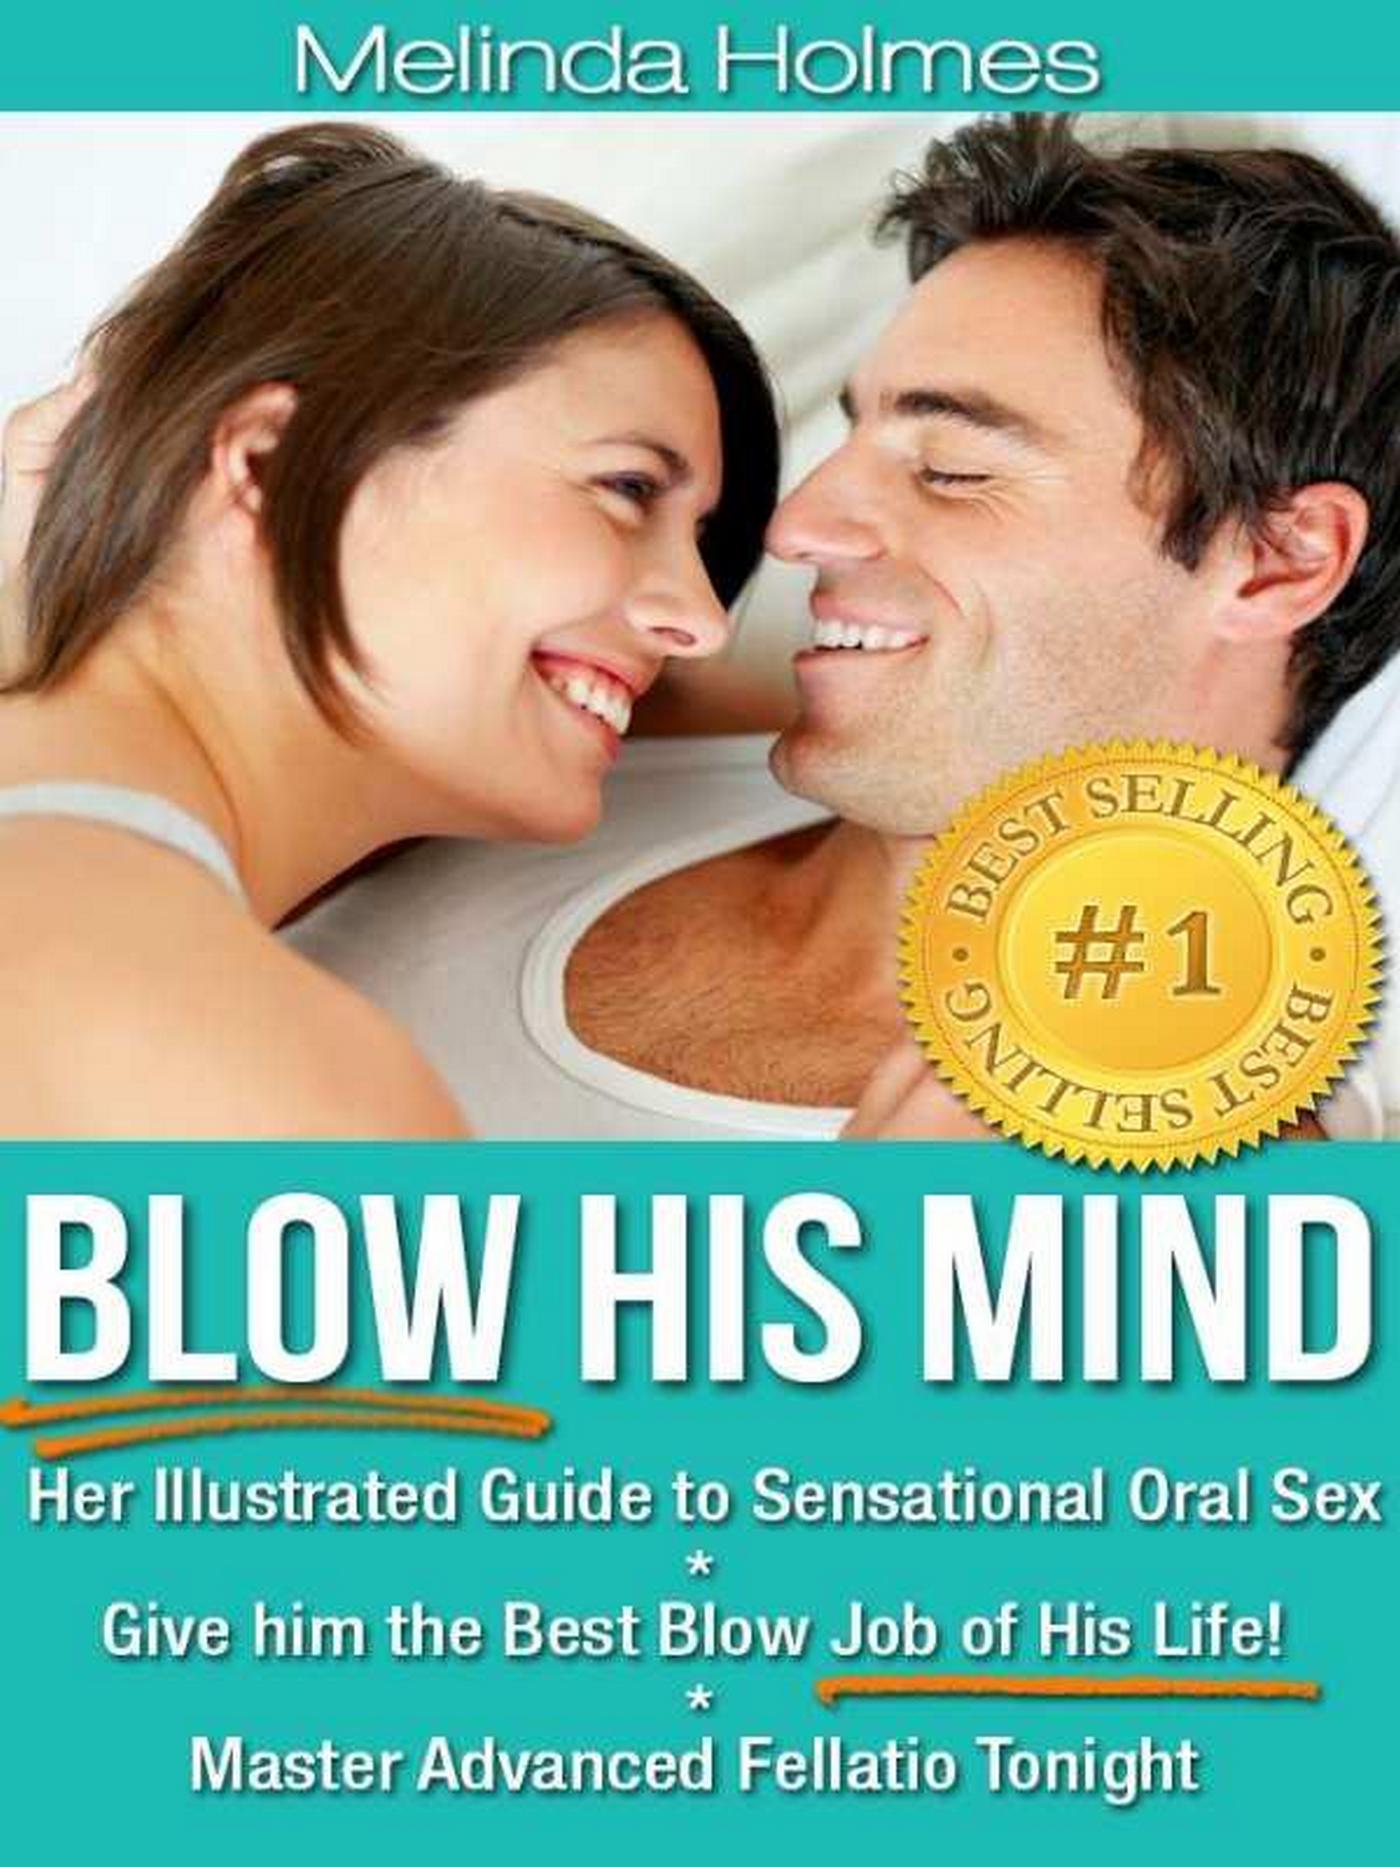 A Foot-Lovers Guide to Sensational Blow Jobs